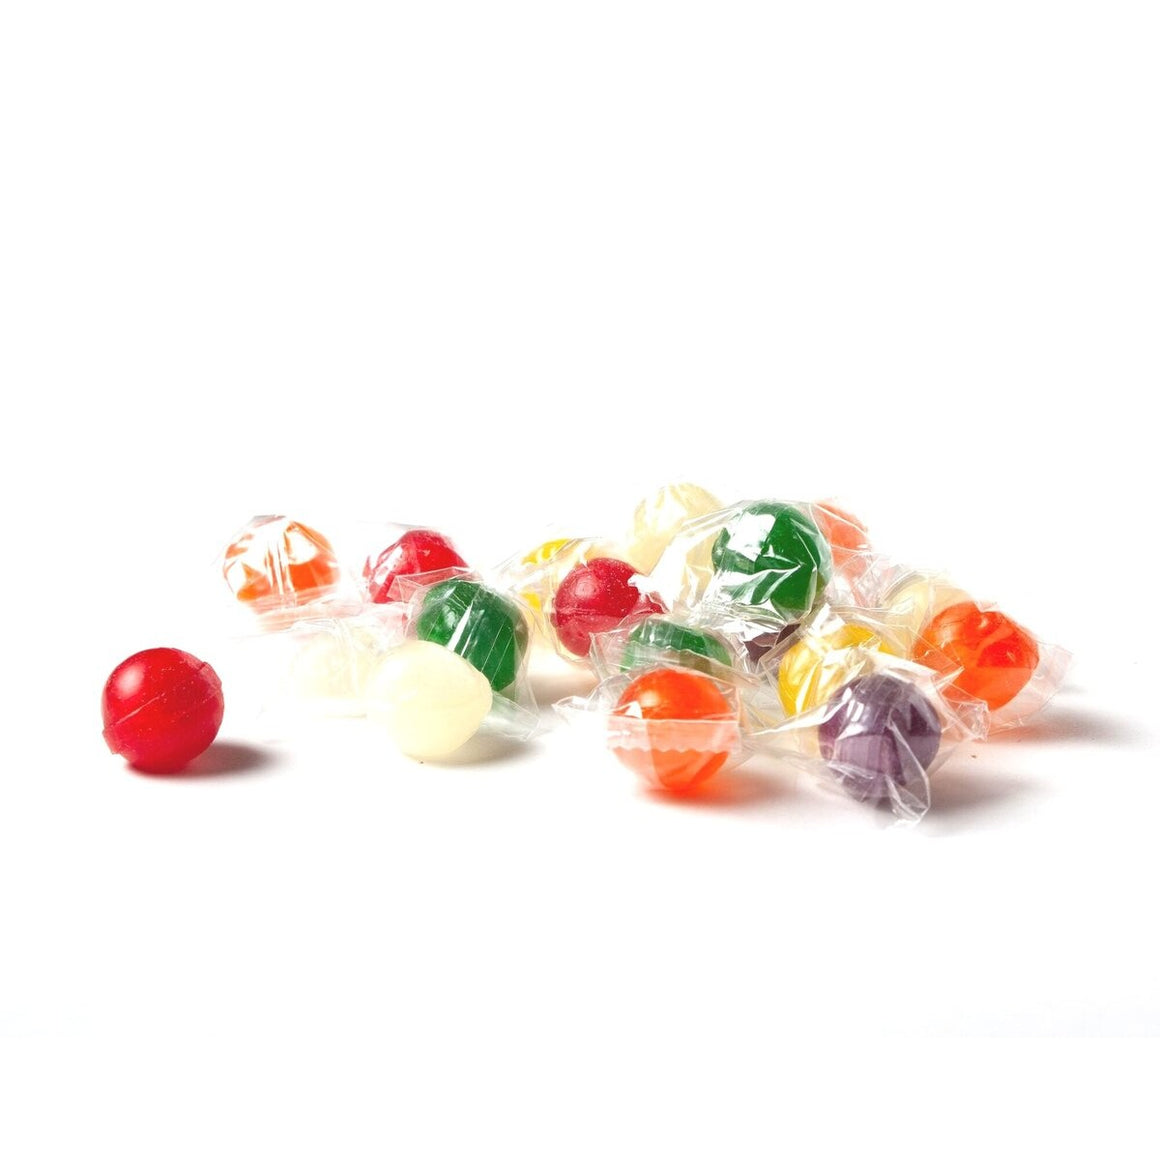 All City Candy Washburn's Assorted Sour Balls Hard Candy - 3 LB Bulk Bag Bulk Wrapped Washburn Candy For fresh candy and great service, visit www.allcitycandy.com